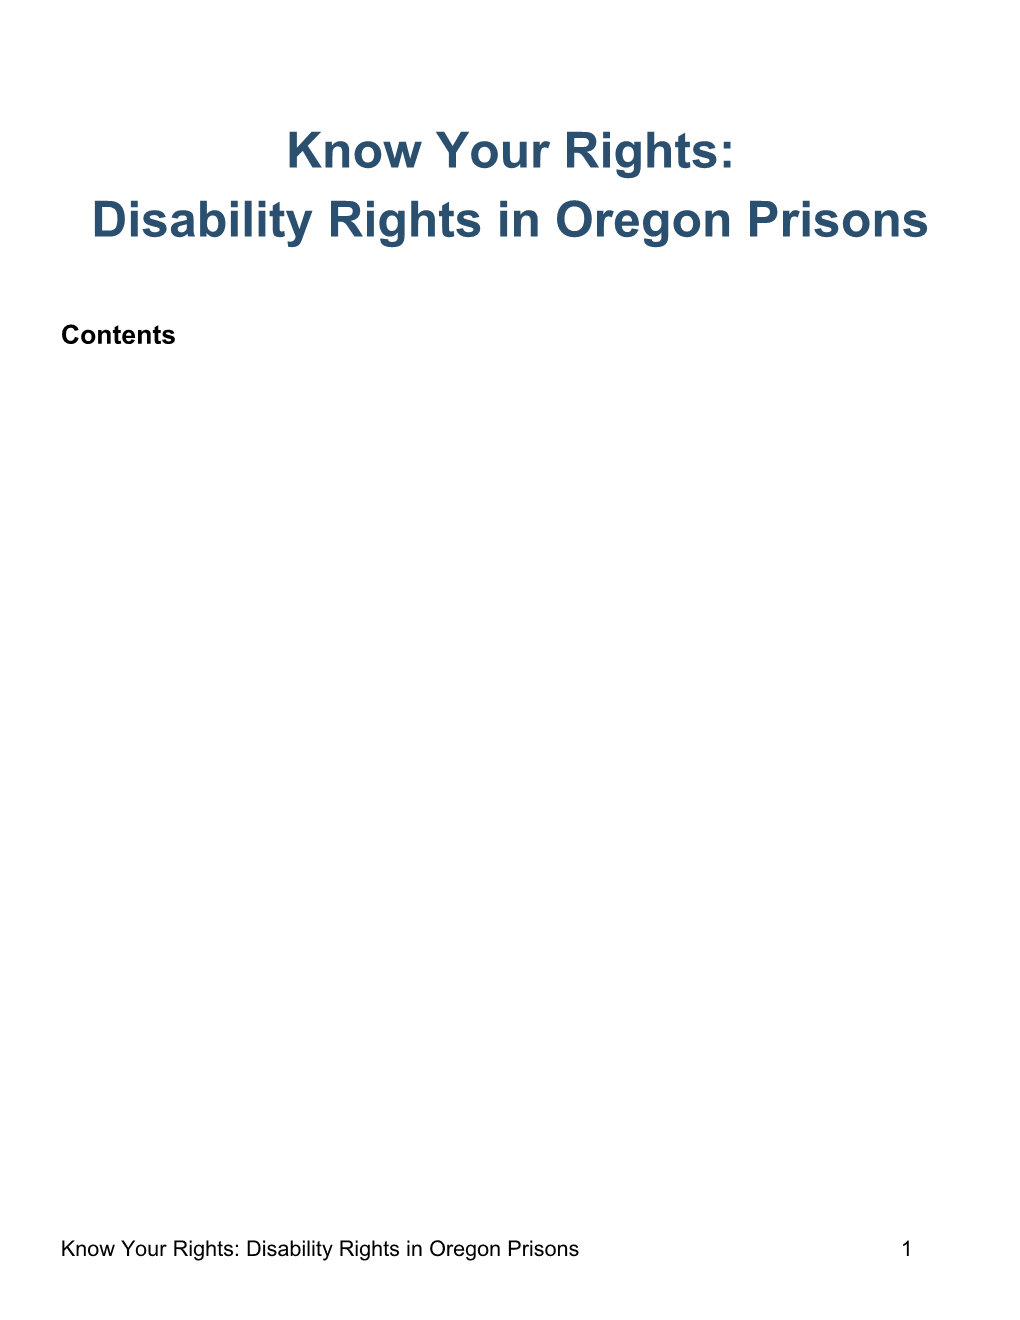 Know Your Rights: Disability Rights in Oregon Prisons